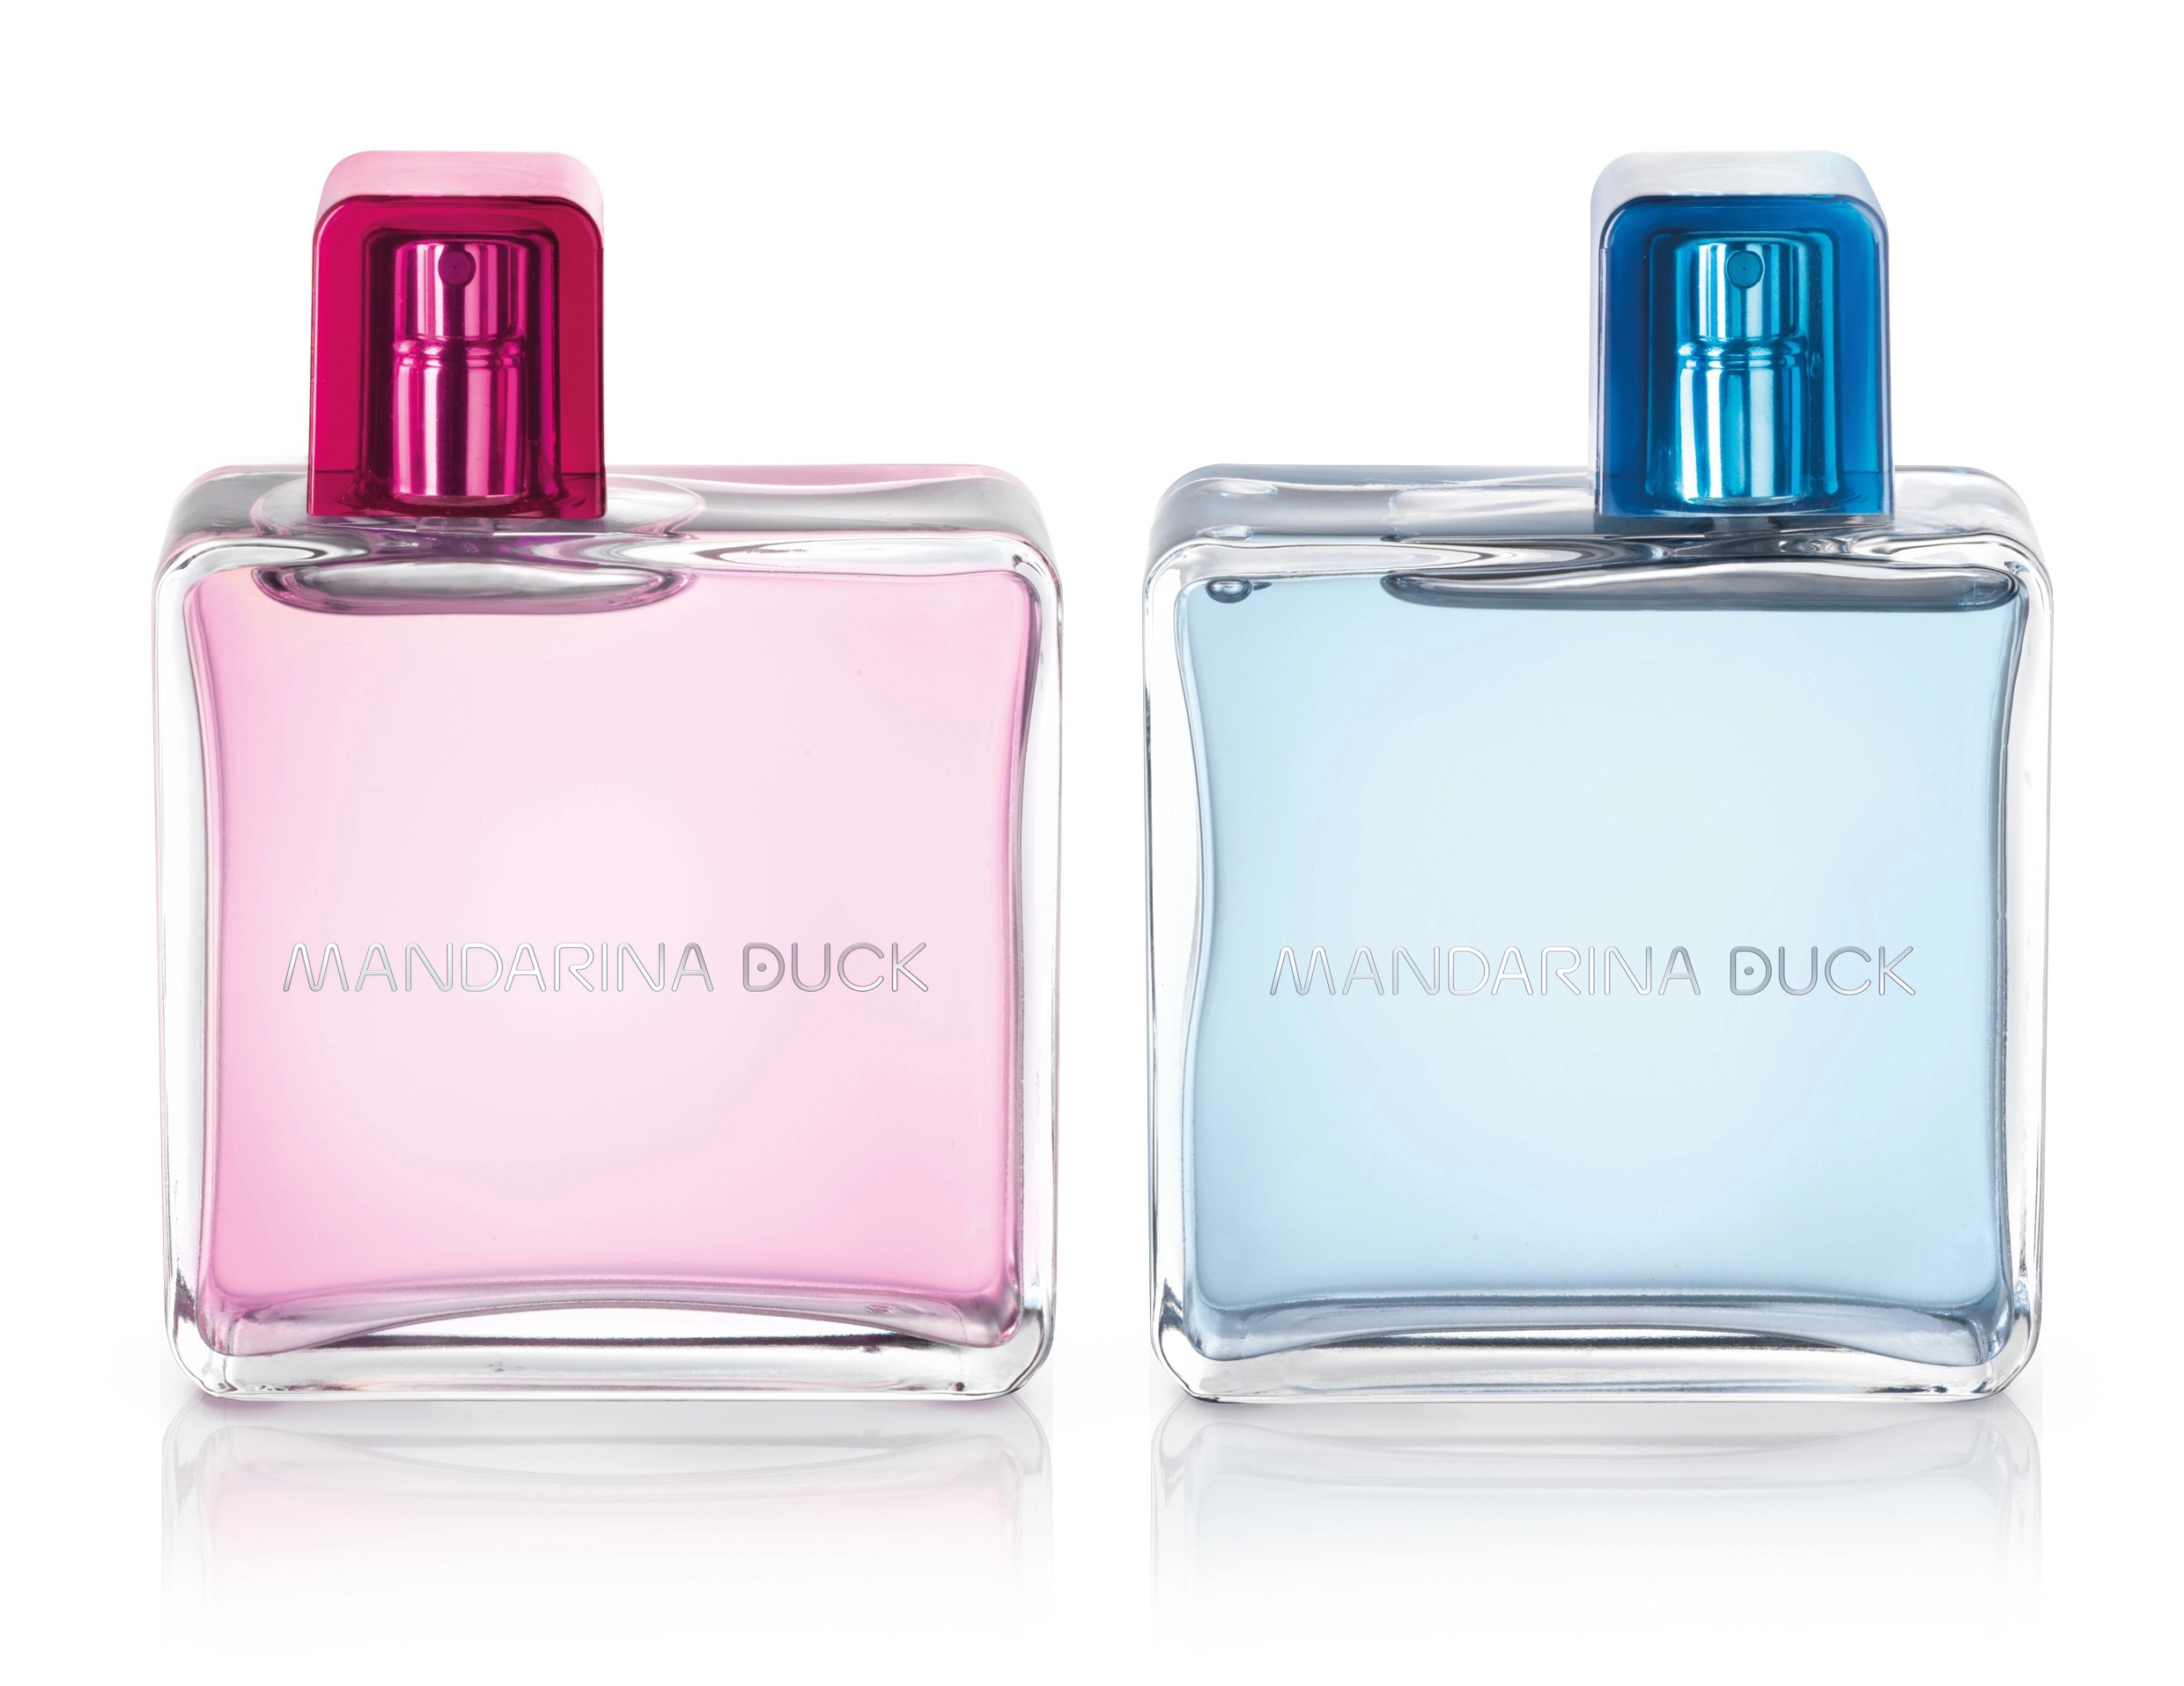 Louis Vuitton has launched the perfect perfume for globe-trotters